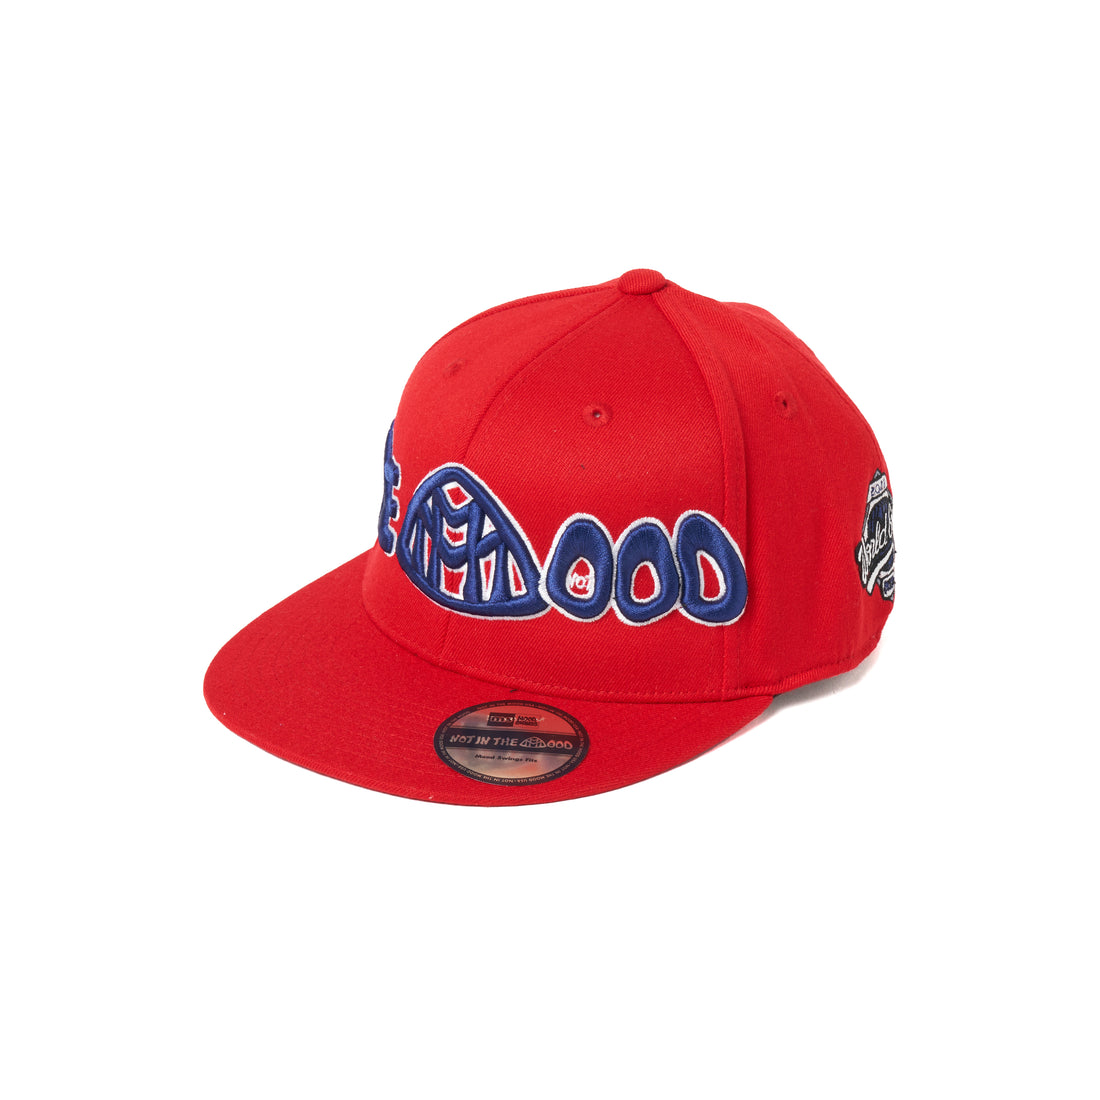 Mood Swings Red Fitted Cap